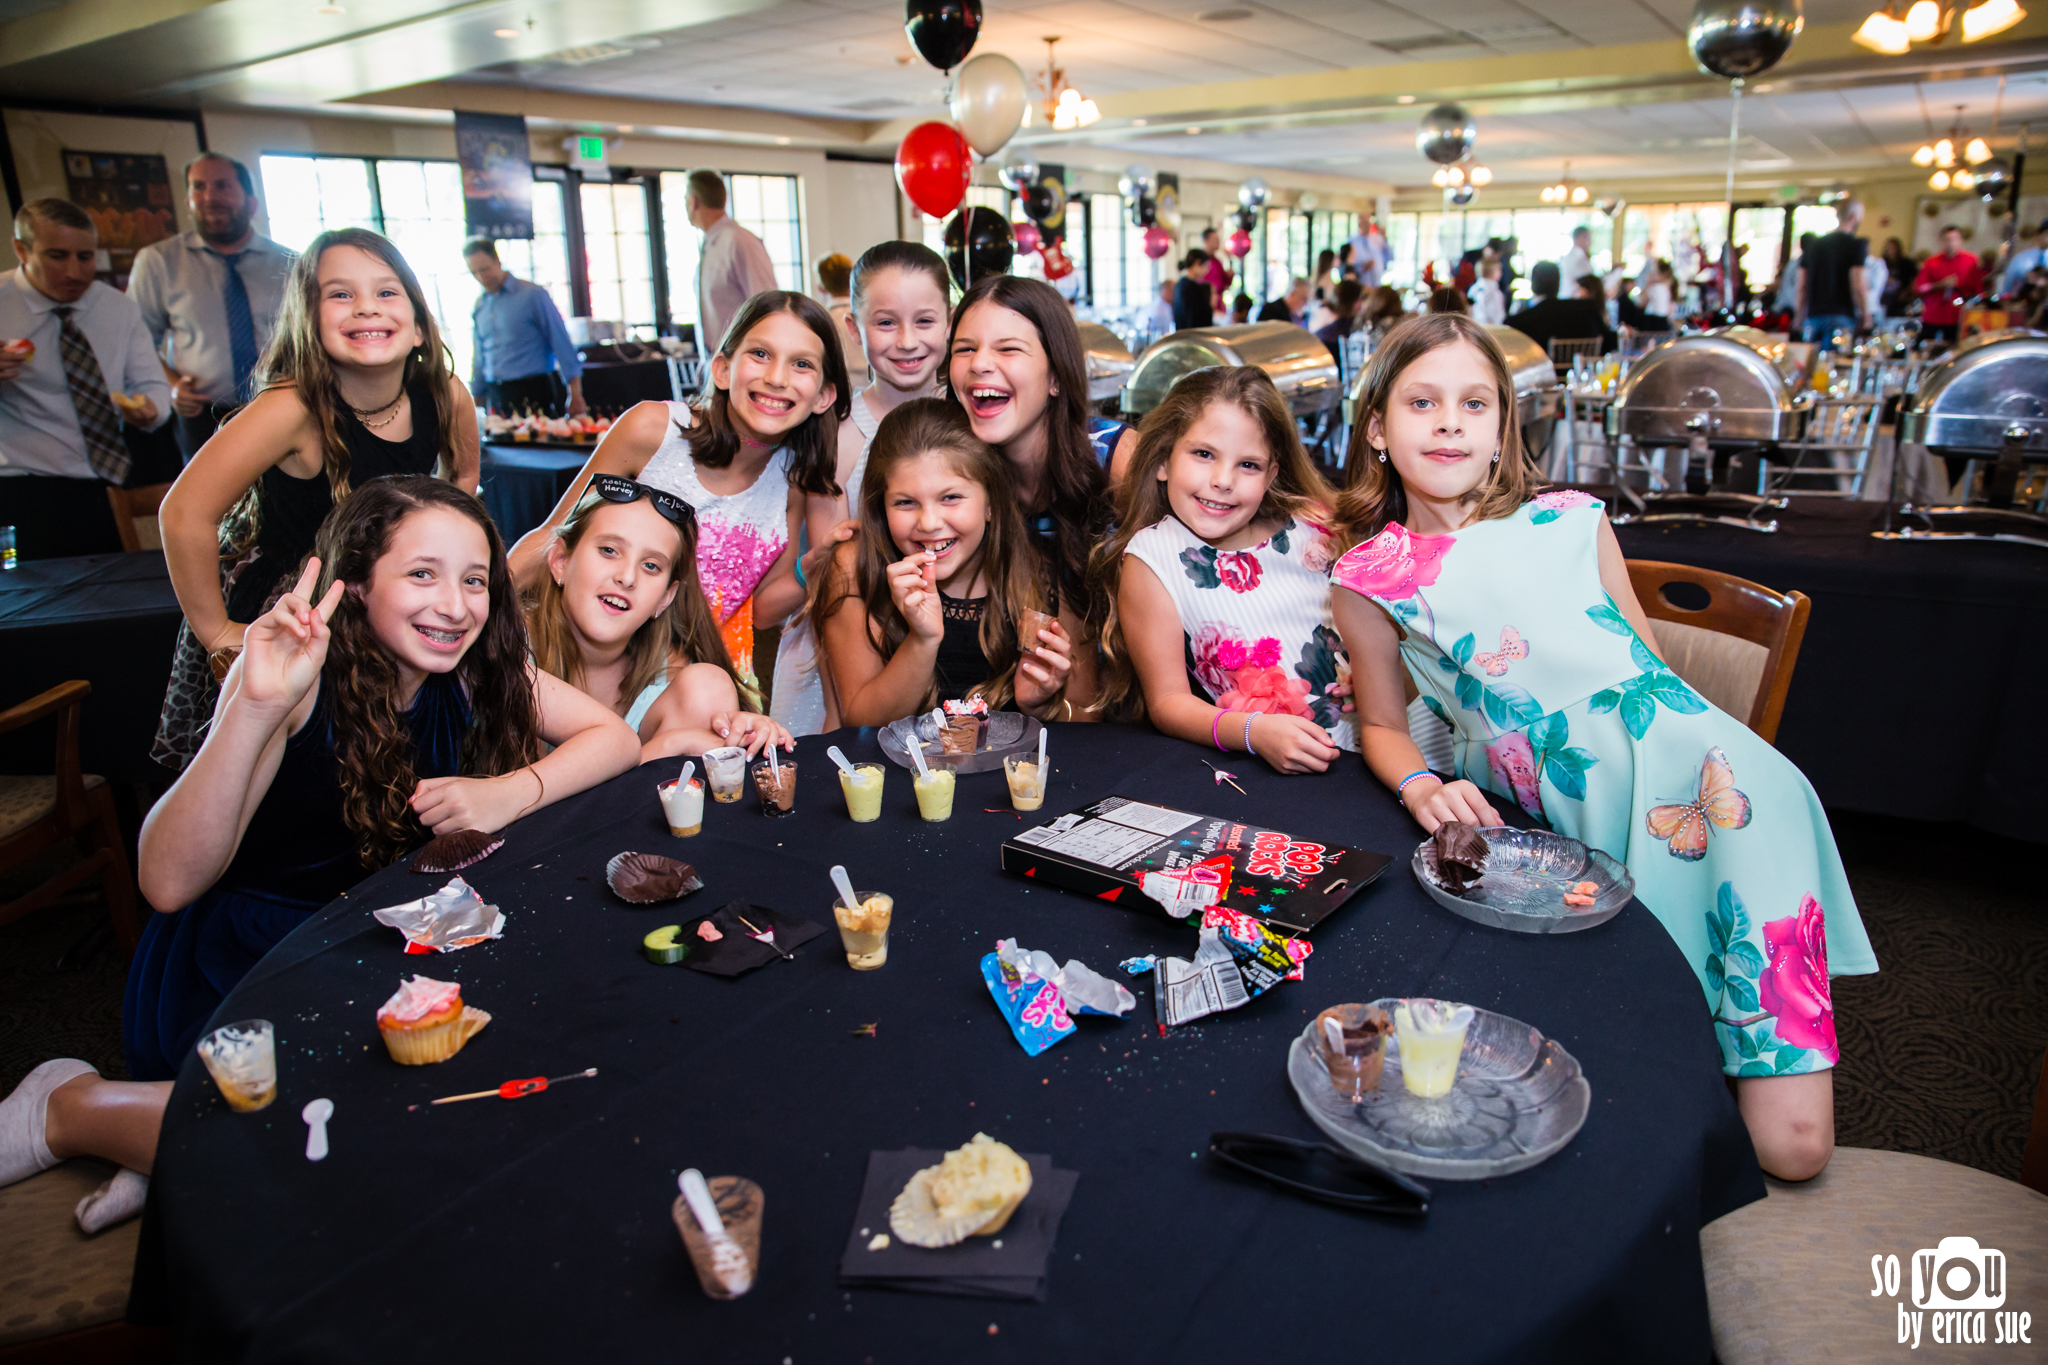 bar-mitzvah-pembroke-lakes-golf-country-club-mitzvah-photography-so-you-by-erica-sue-39.jpg